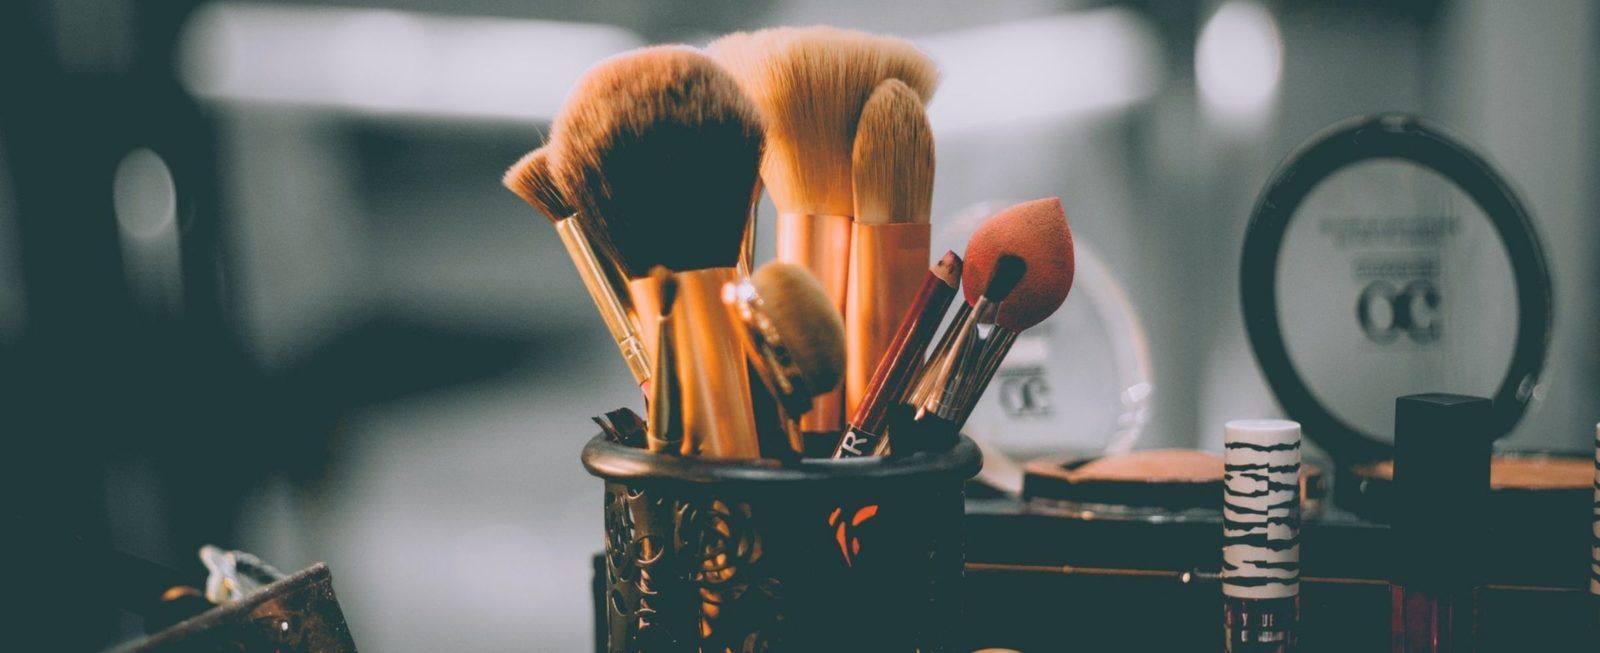 15 best makeup brushes to use for flawless makeup looks